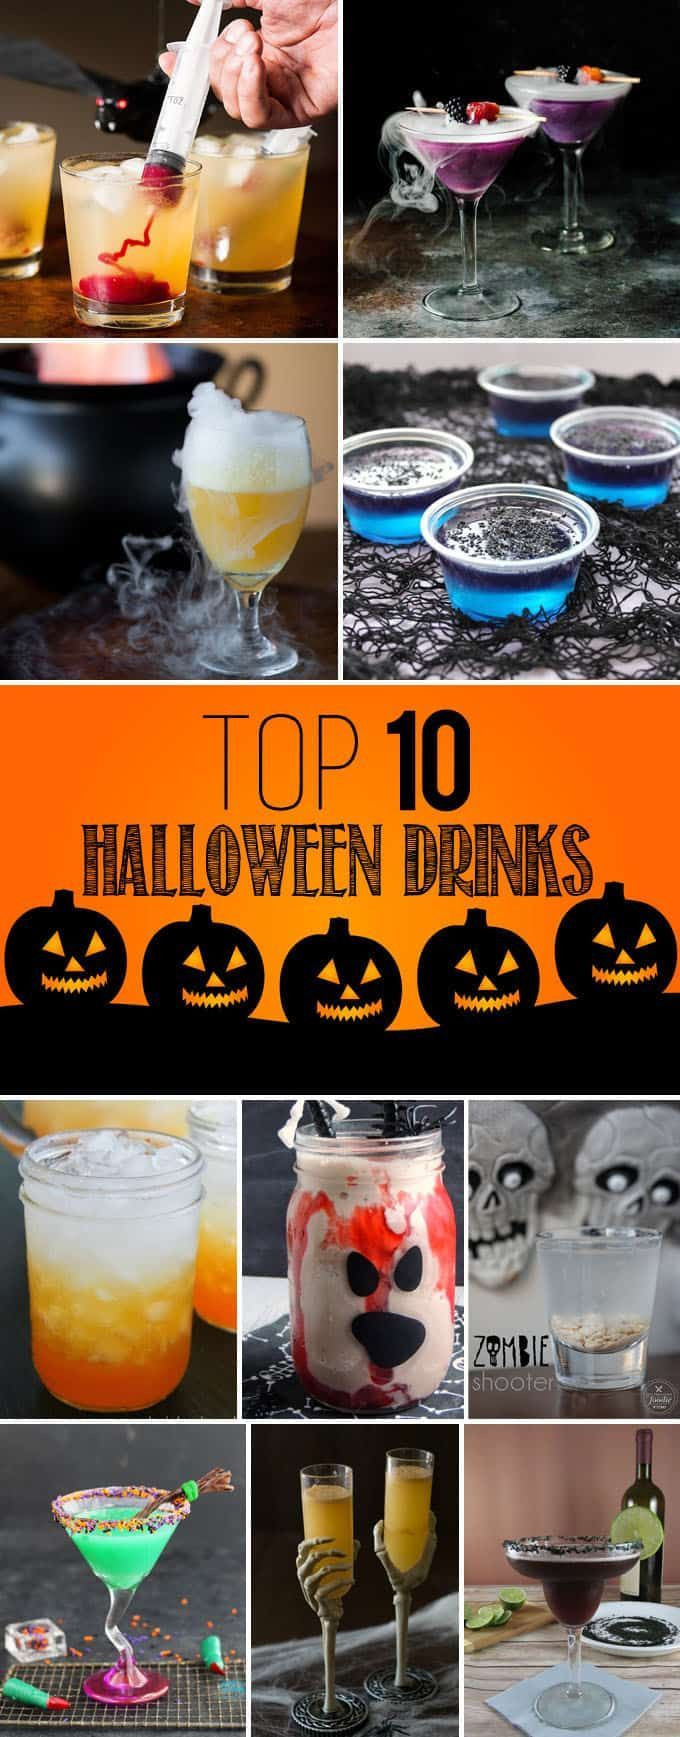 Adult Halloween Drinks
 Halloween Drinks make every Halloween party an event to